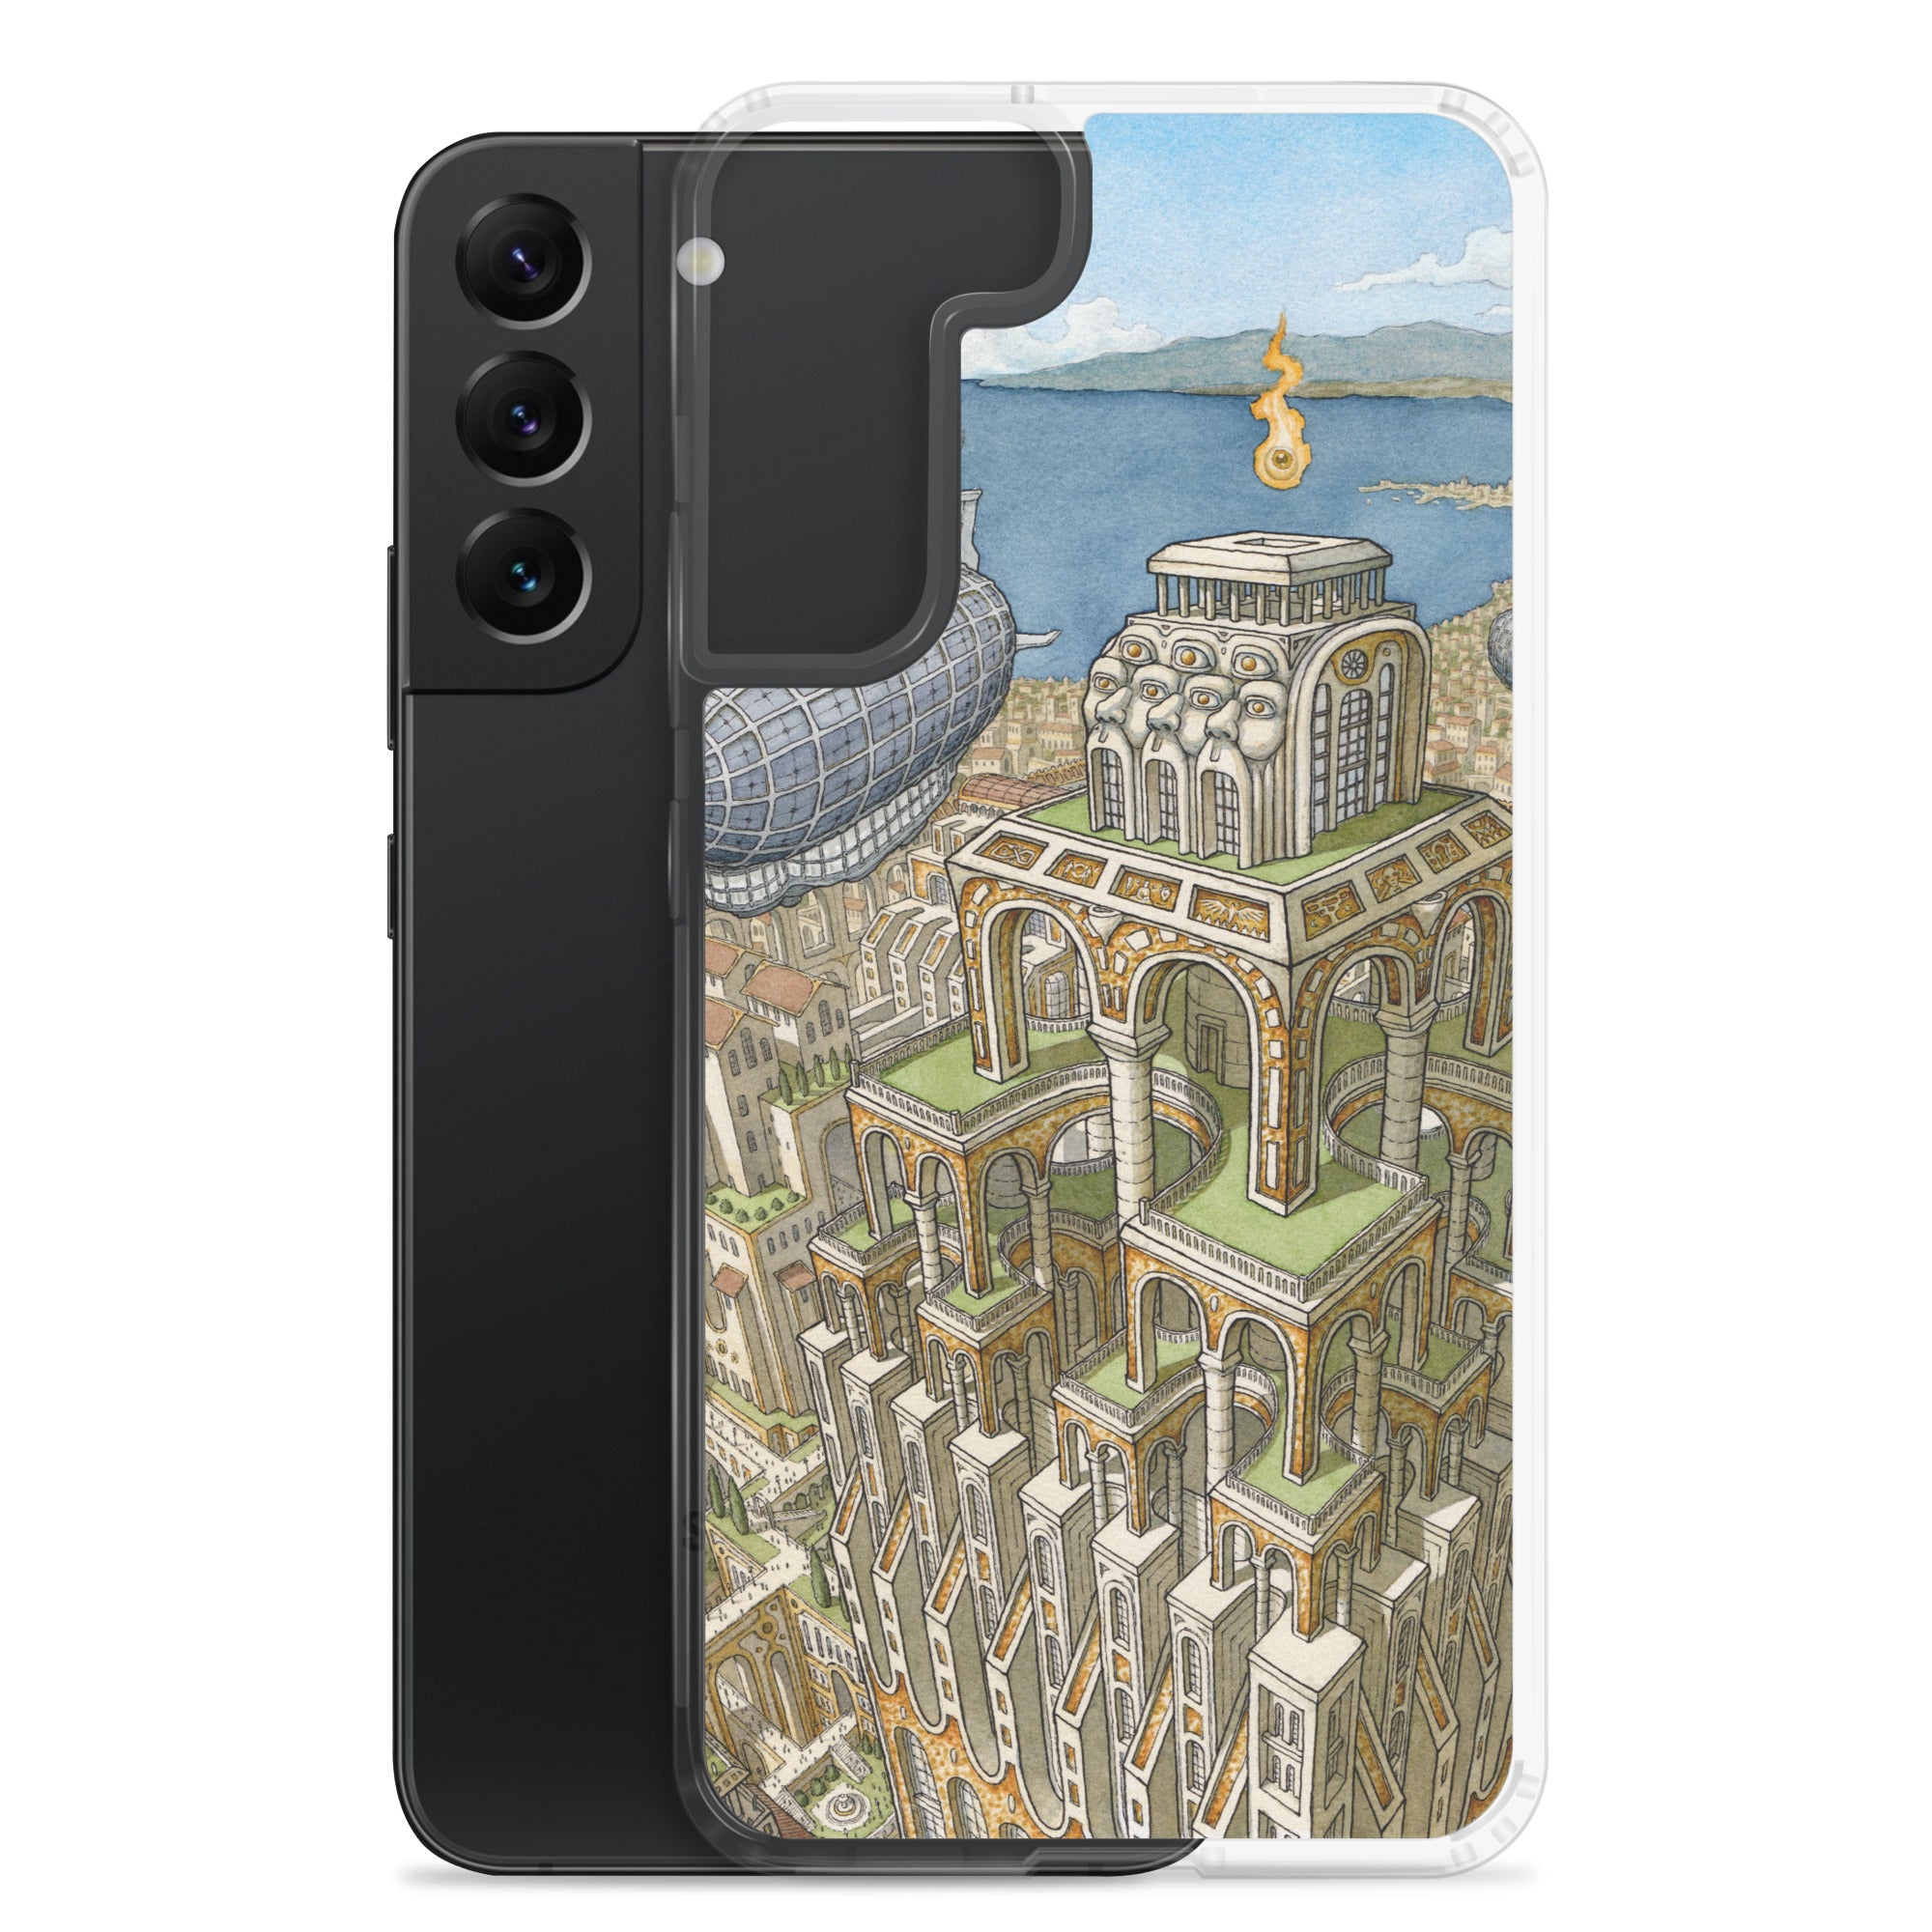 Samsung Case - The Oracle Tower